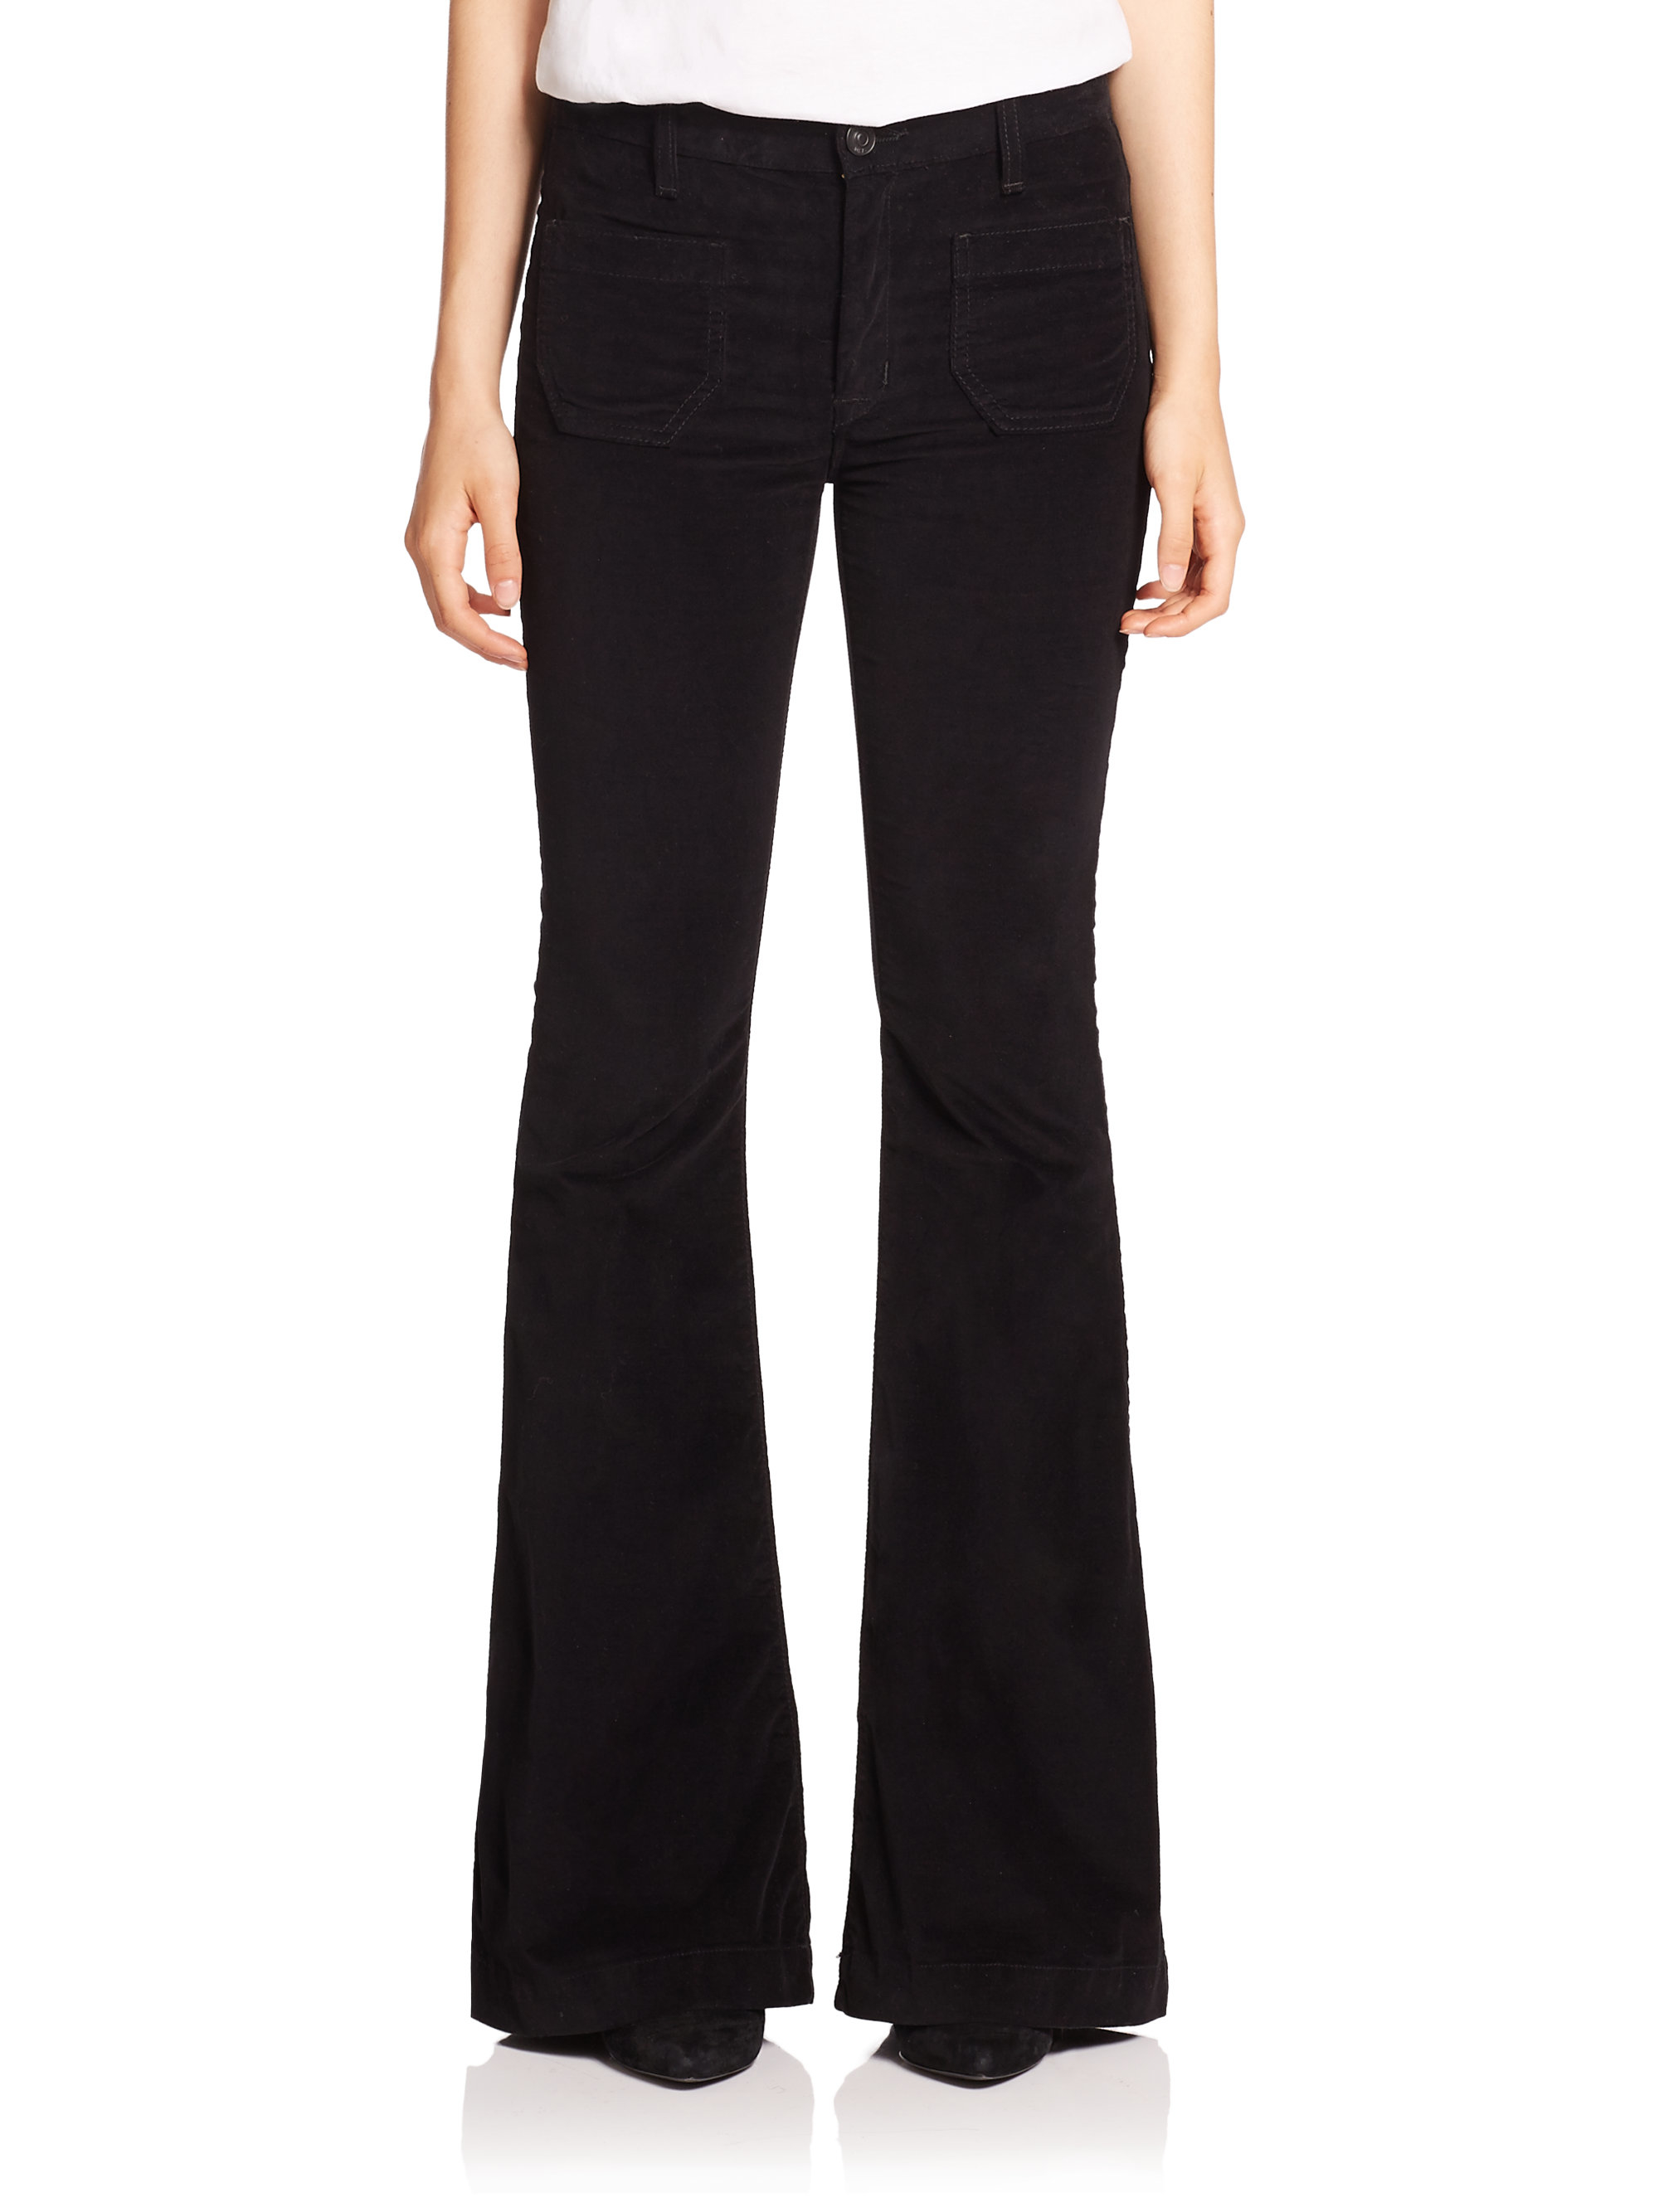 Hudson Jeans Taylor Corduroy Flare Pants in Black - Lyst